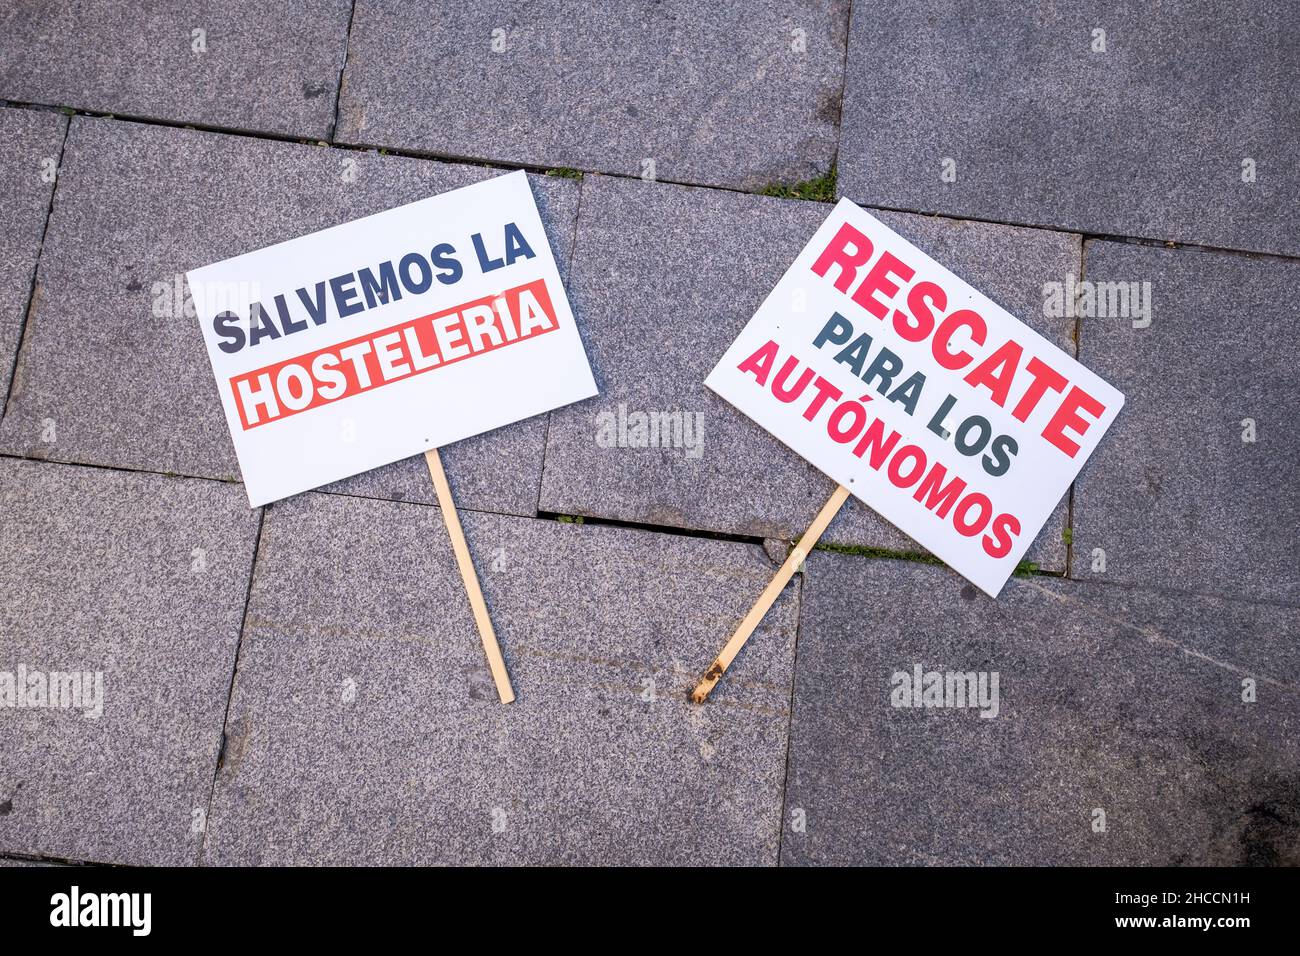 Valencia, Spain; January 21, 2021: Two 'Save the hospitality industry' and 'Rescue for the self-employed' signs on the ground during a demonstration Stock Photo